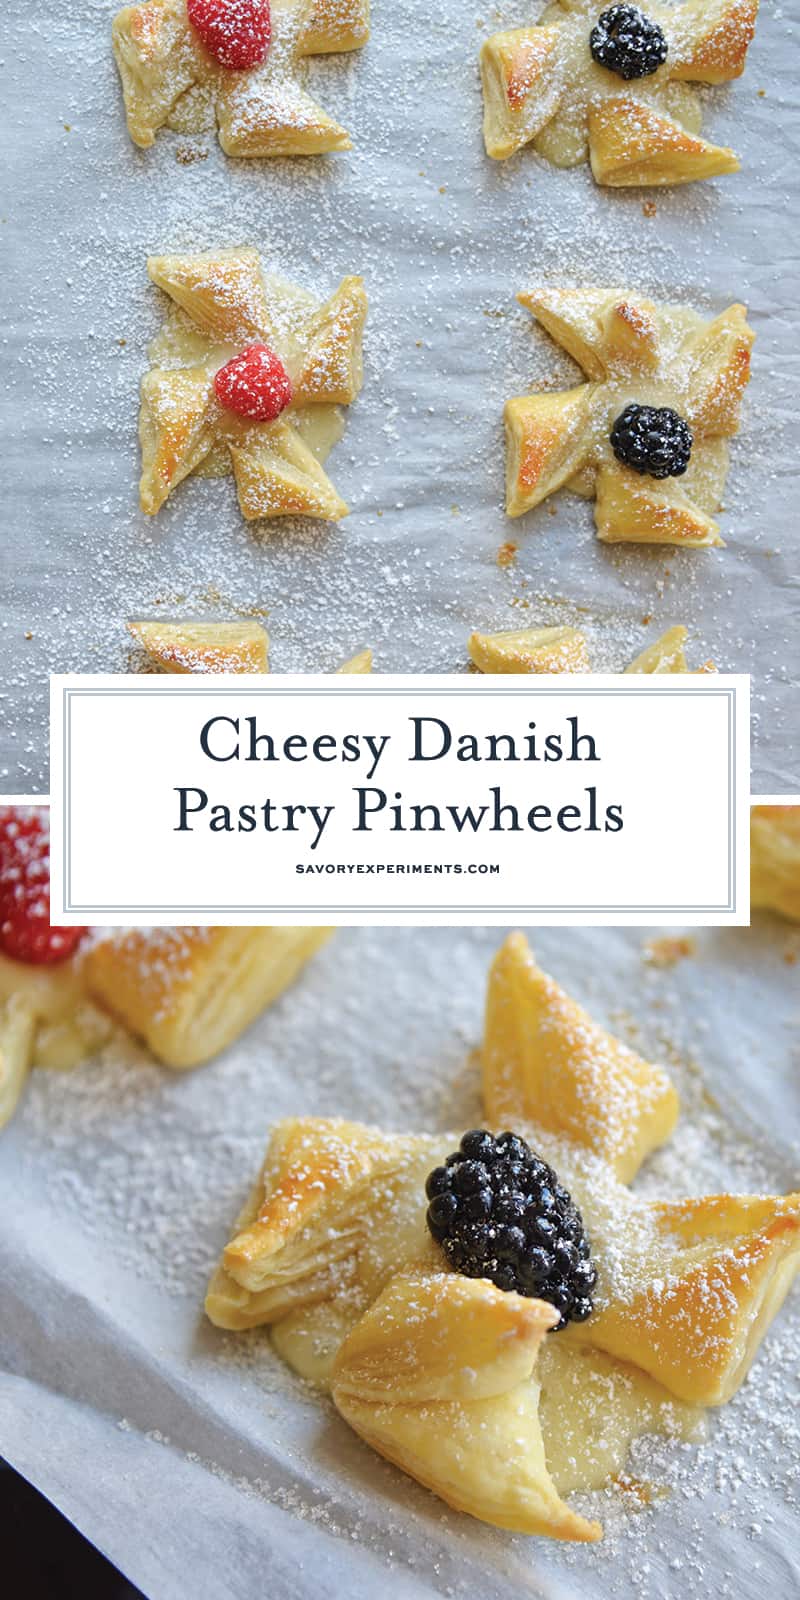 Danish Pastry make a great dessert that is not heavy but is also easy and quick to put together. Everyone will love this brie in puff pastry! #puffpastrydesserts #brieinpuffpastry www.savoryexperiments.com